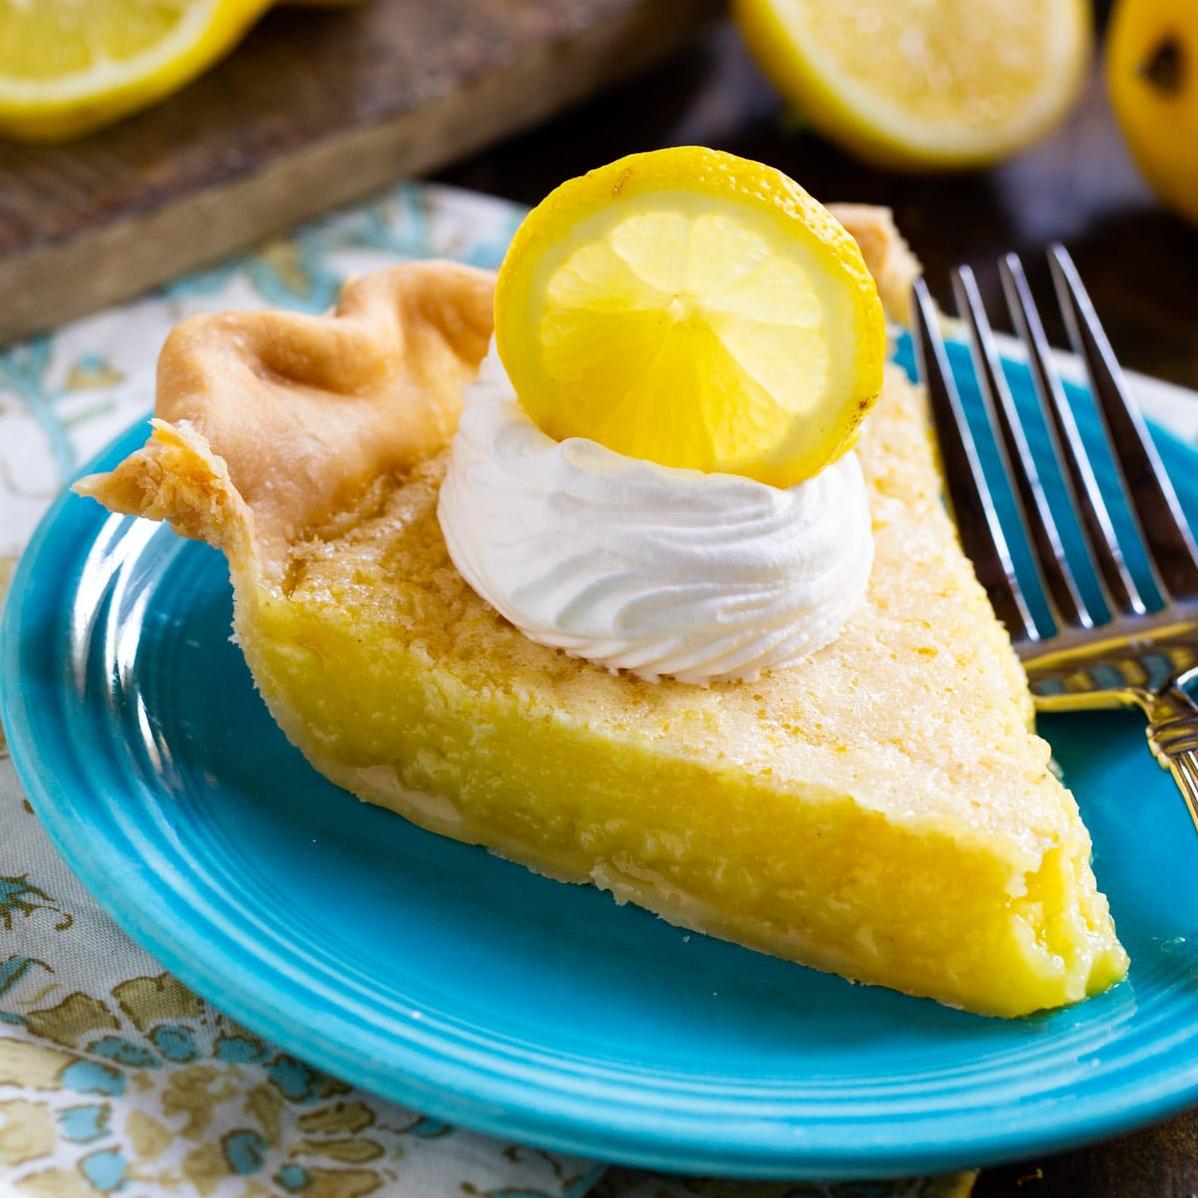  Top this bright yellow pie with fresh whipped cream for extra indulgence.